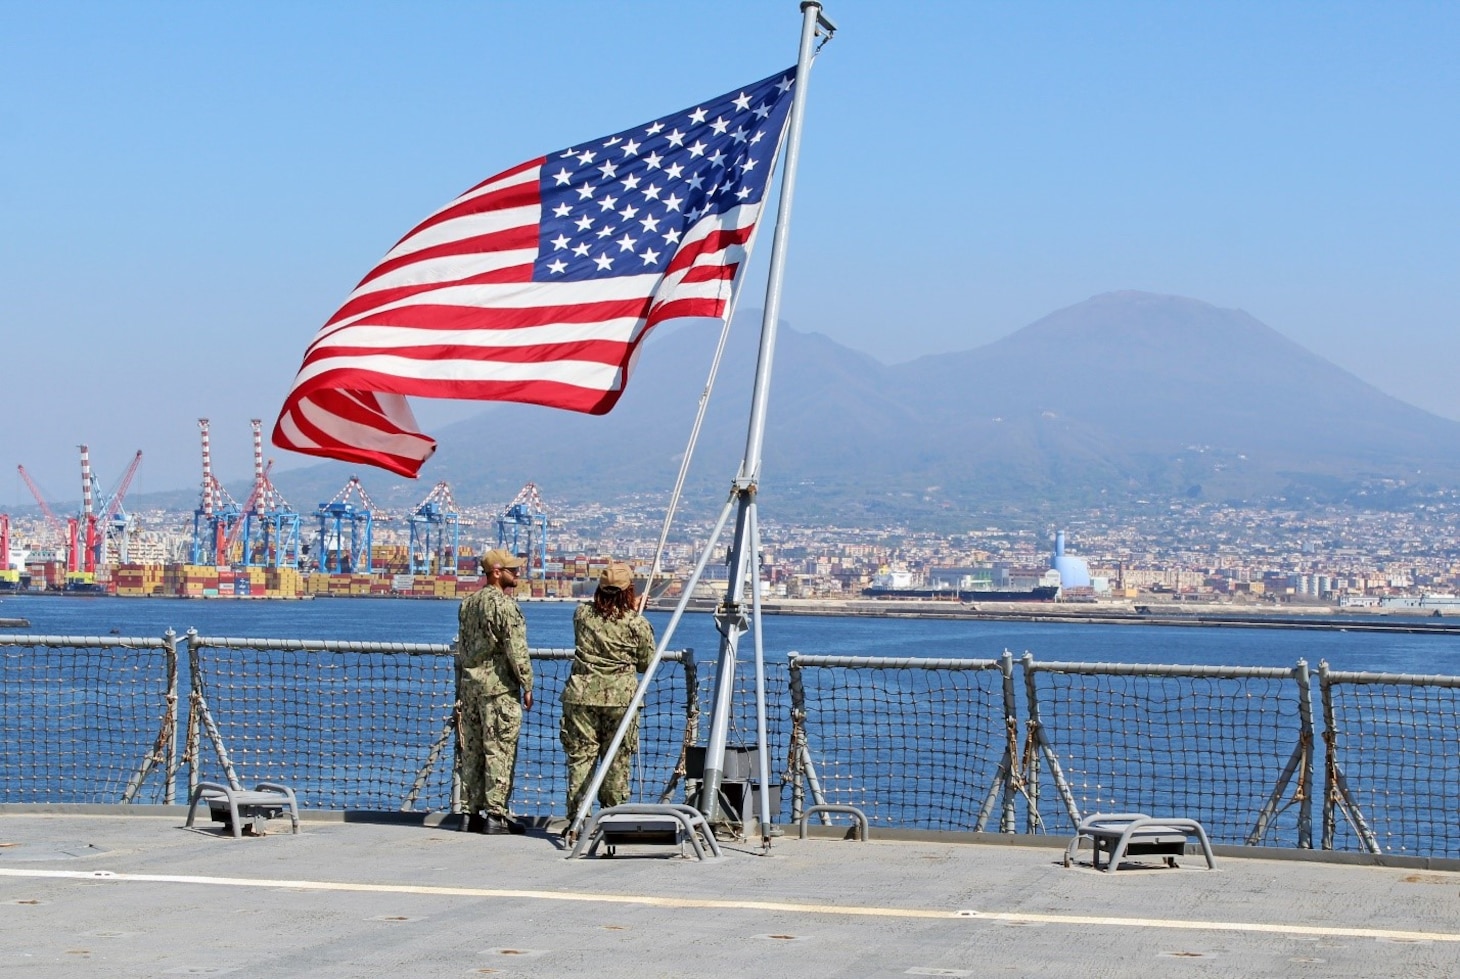 240407-N-JC445-1007 NAPLES, Italy (April 7, 2024) Electronics Technician 3rd Class Michael Thompson and Religious Program Specialist 1st Class Ashley Ferguson raise the Ensign during sea and anchor detail aboard the Blue Ridge-class command and control ship USS Mount Whitney (LCC 20) as it arrives in Naples, Italy. Mount Whitney, the U.S. Sixth Fleet flagship, is on a scheduled port visit to participate in the 75th anniversary of the NATO Alliance and enhance U.S.-Italian relations. Homeported in Gaeta, Mount Whitney operates with a combined crew of U.S. Sailors and Military Sealift Command civil service members. (U.S. Navy photo by Mass Communication Specialist 2nd Class Mario Coto)